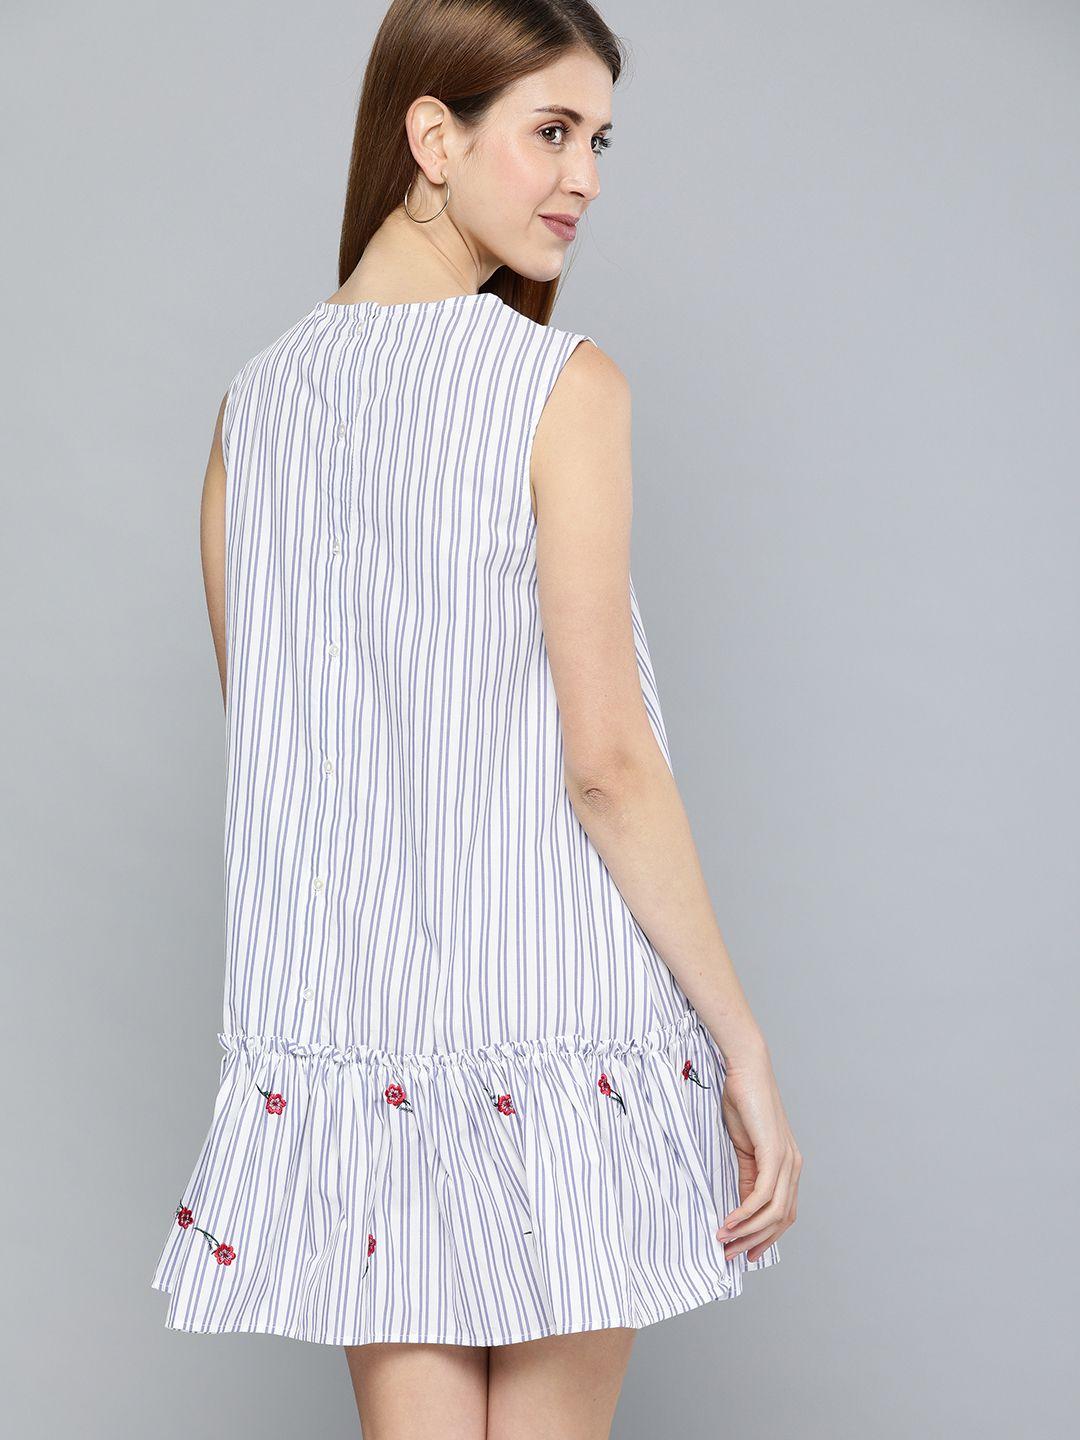 here&now women white & blue striped drop-waist dress with embroidered detailing